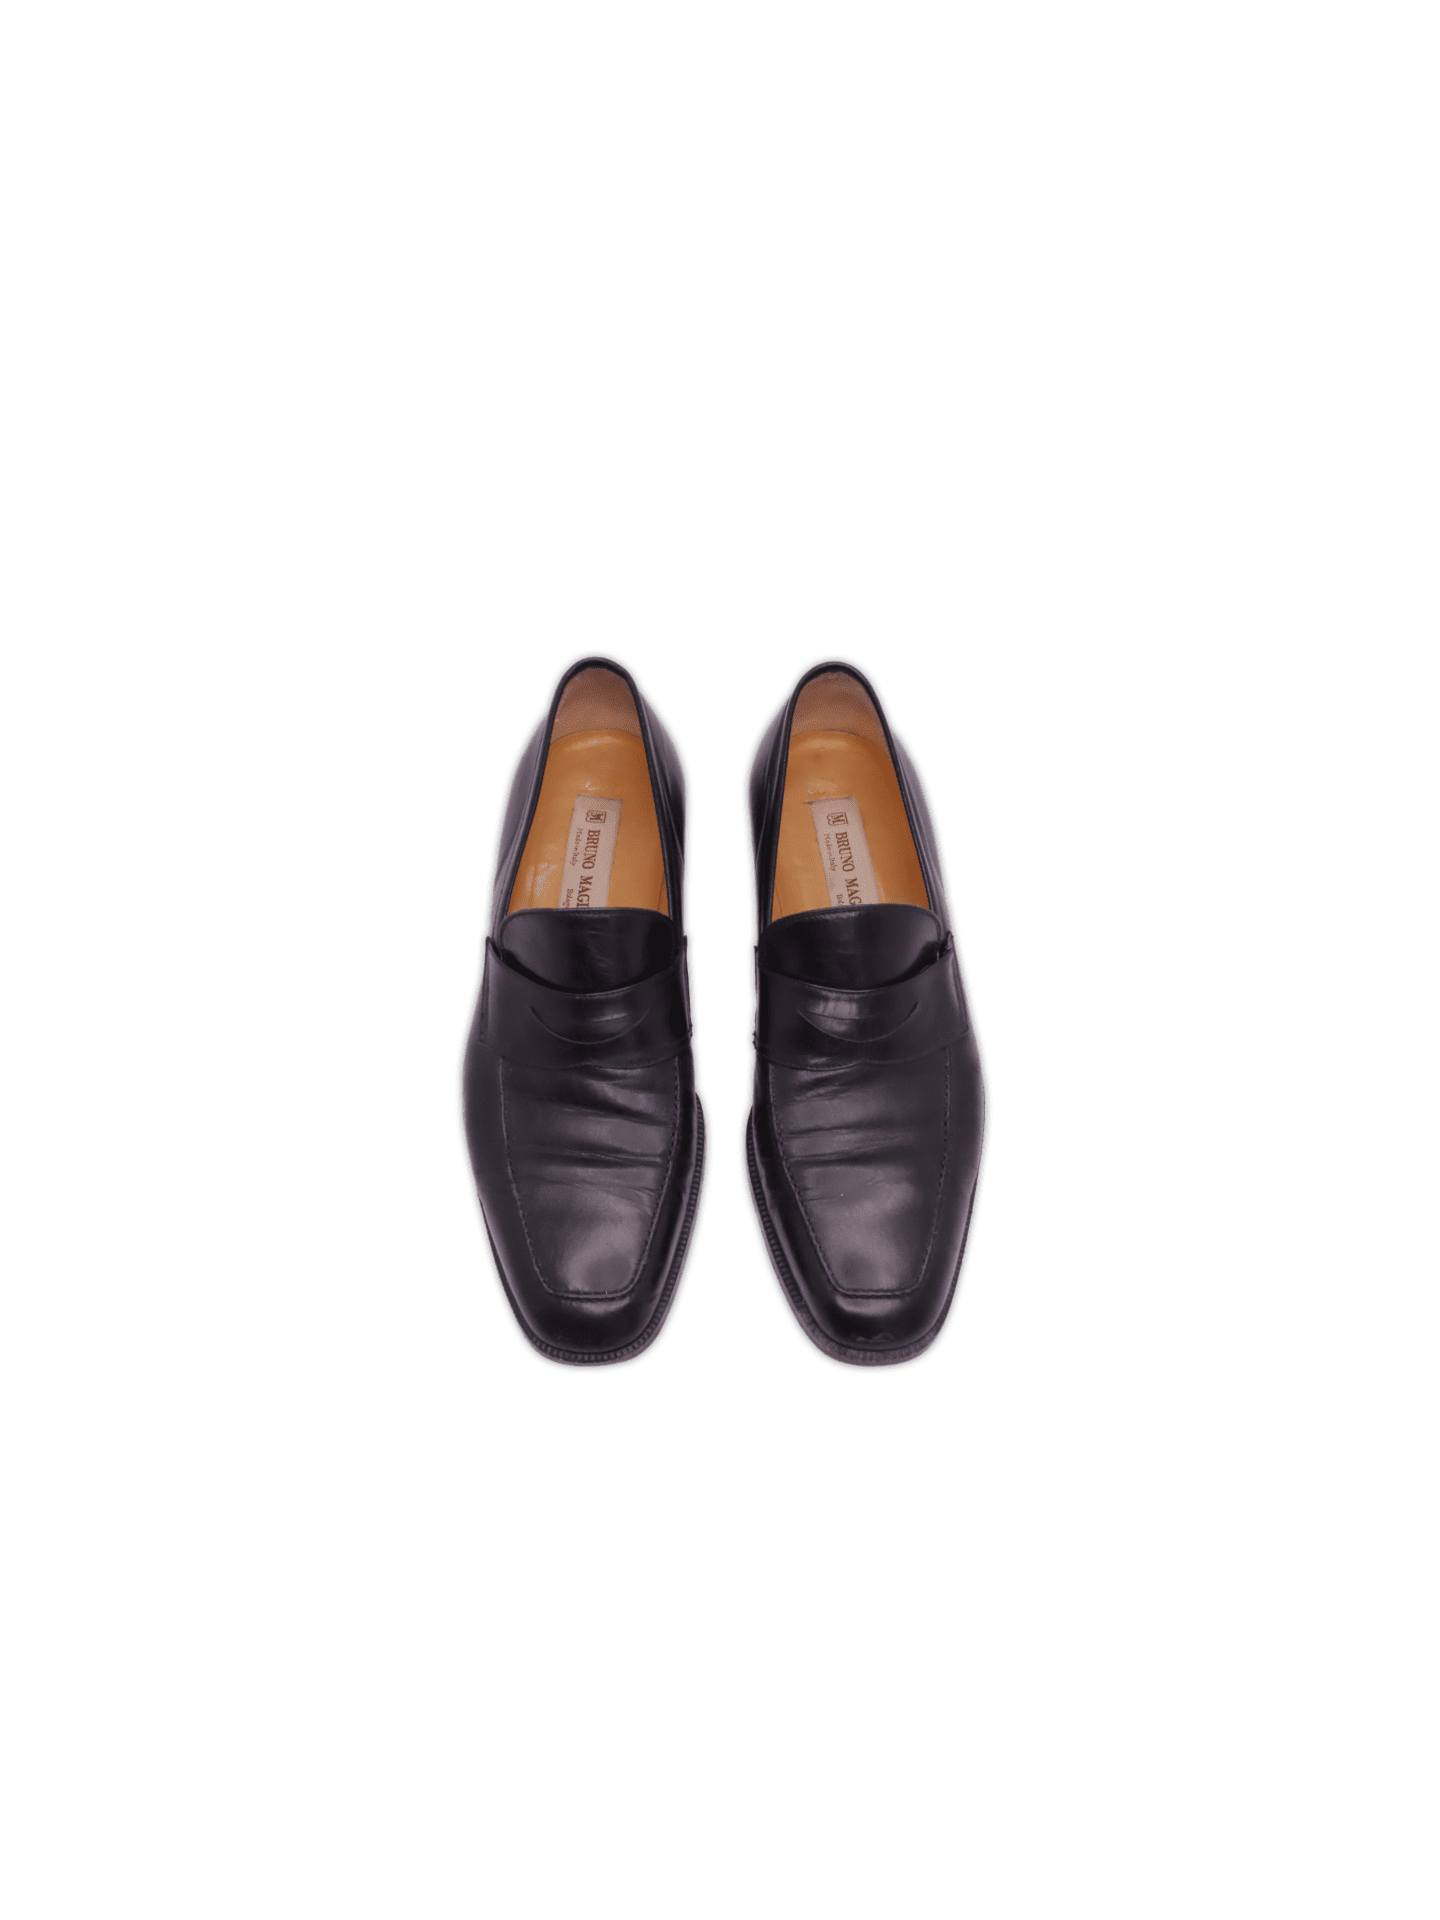 These penny loafers feature Italian calf leather linings, Italian leather outsoles, Blake-stitched construction and Italian brush-off calf uppers. Loafers are Black with Dark Brown soles and are a size EU 41 / NZ 7. Made in Italy from genuine Italian leather.